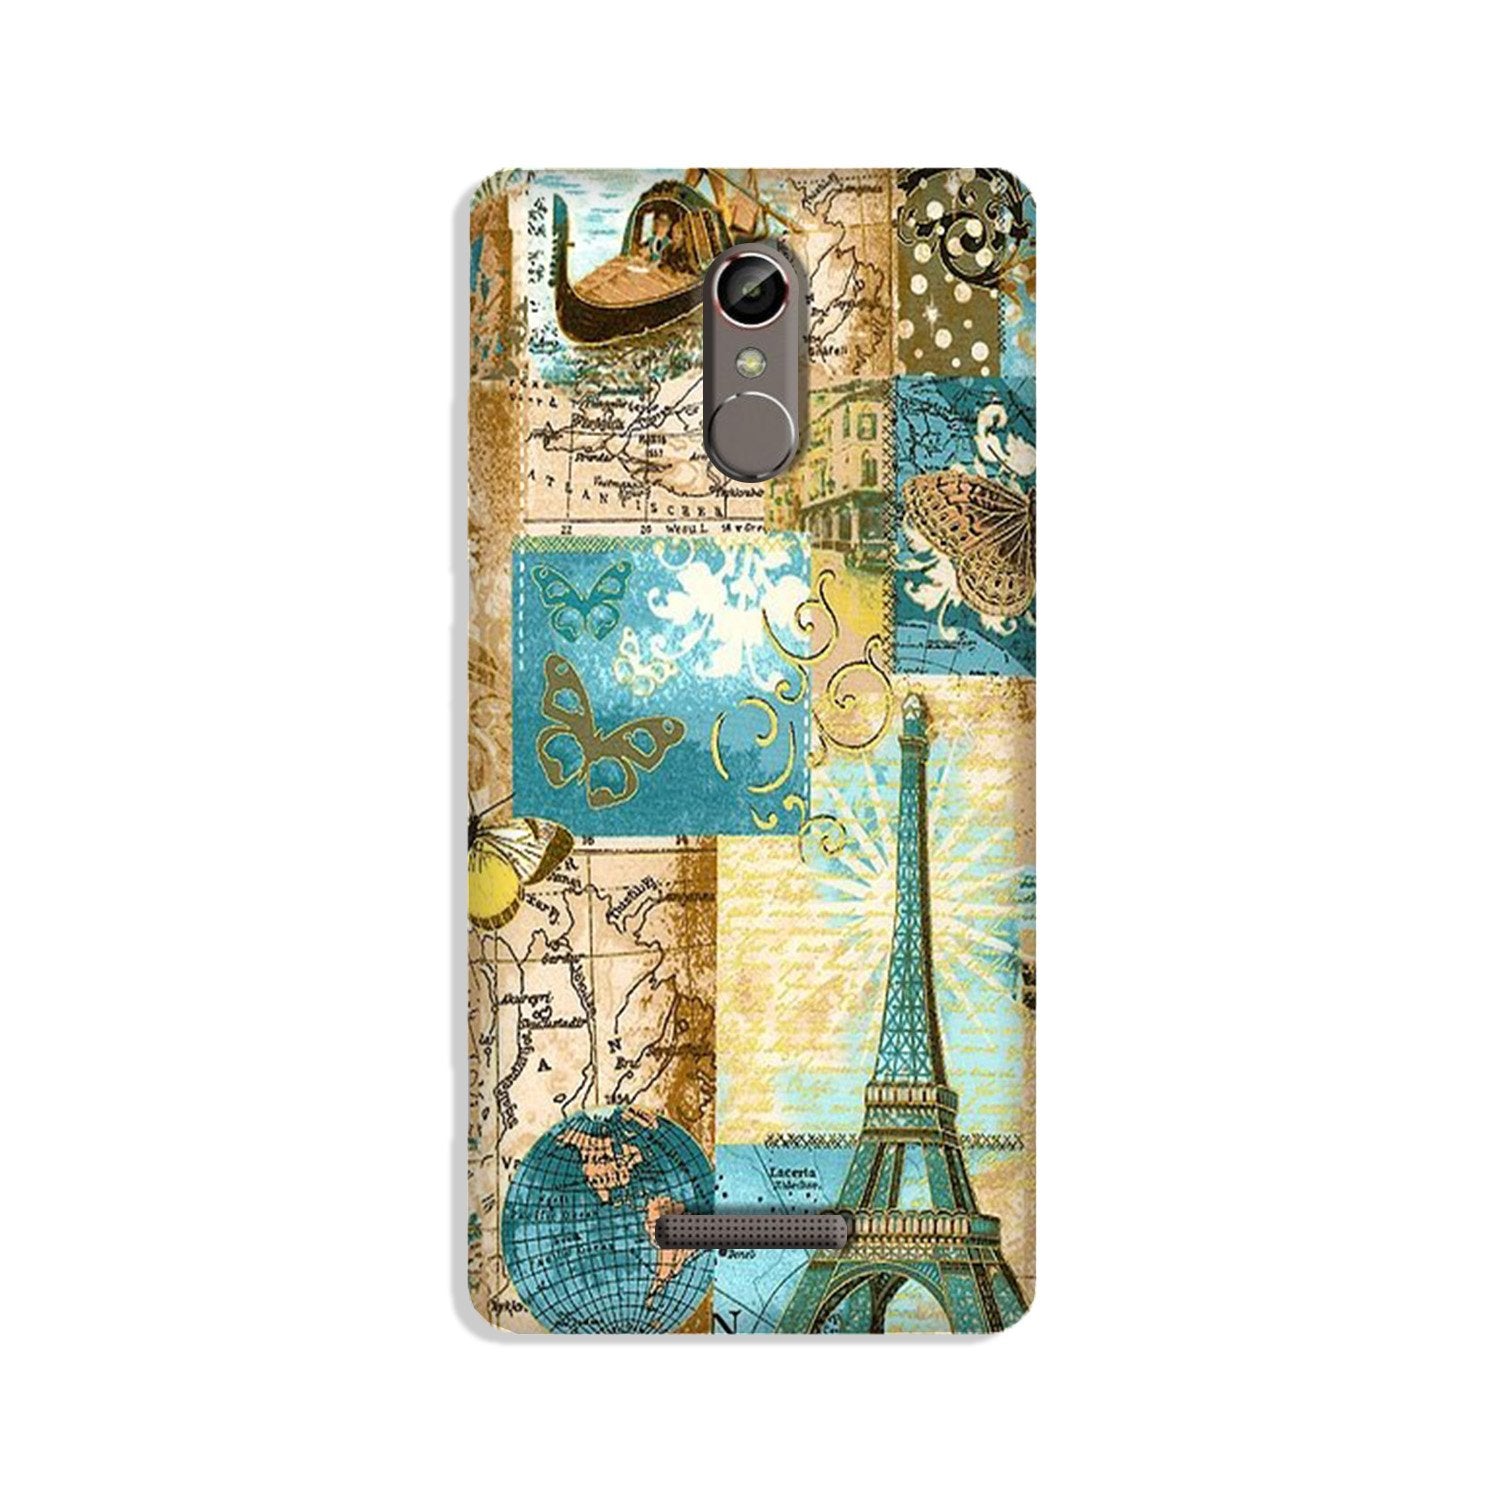 Travel Eiffel Tower Case for Gionee S6s (Design No. 206)